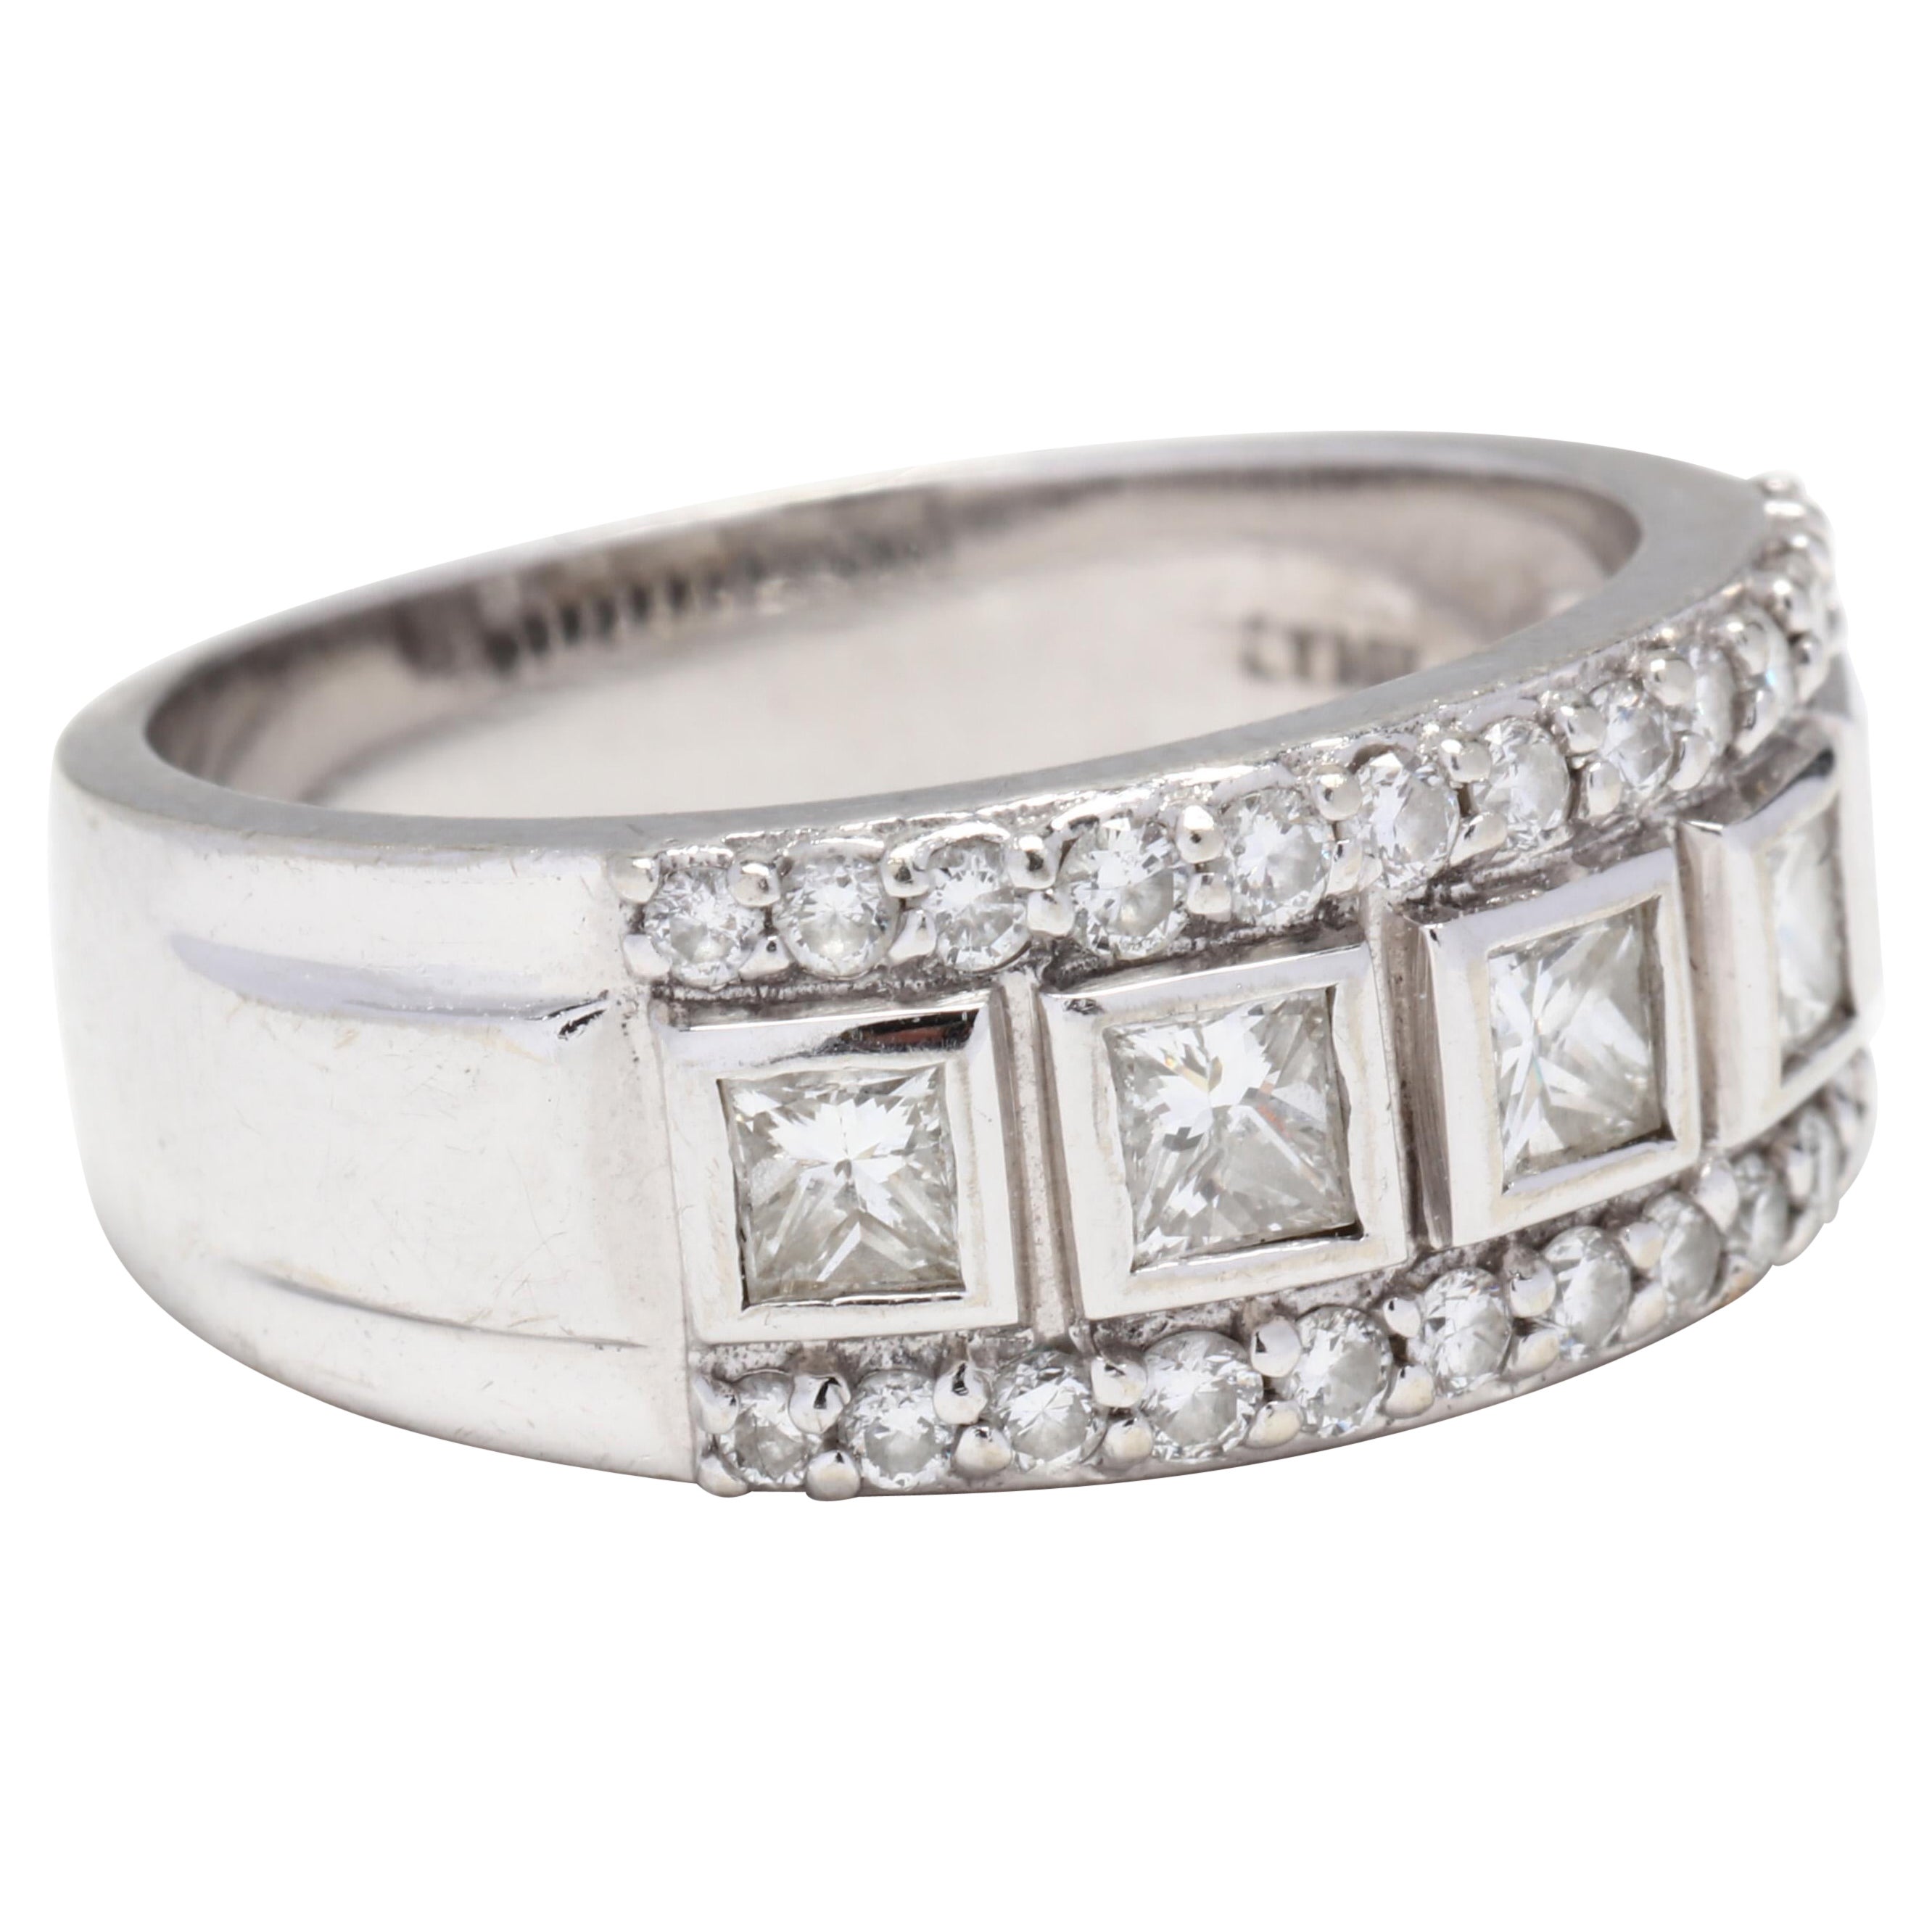 A 14 karat white gold princess and round cut diamond band ring. This ring features five bezel set, princess cut diamonds weighing approximately .90 total carats with a row of full cut round diamonds on either side weighing approximately .40 total